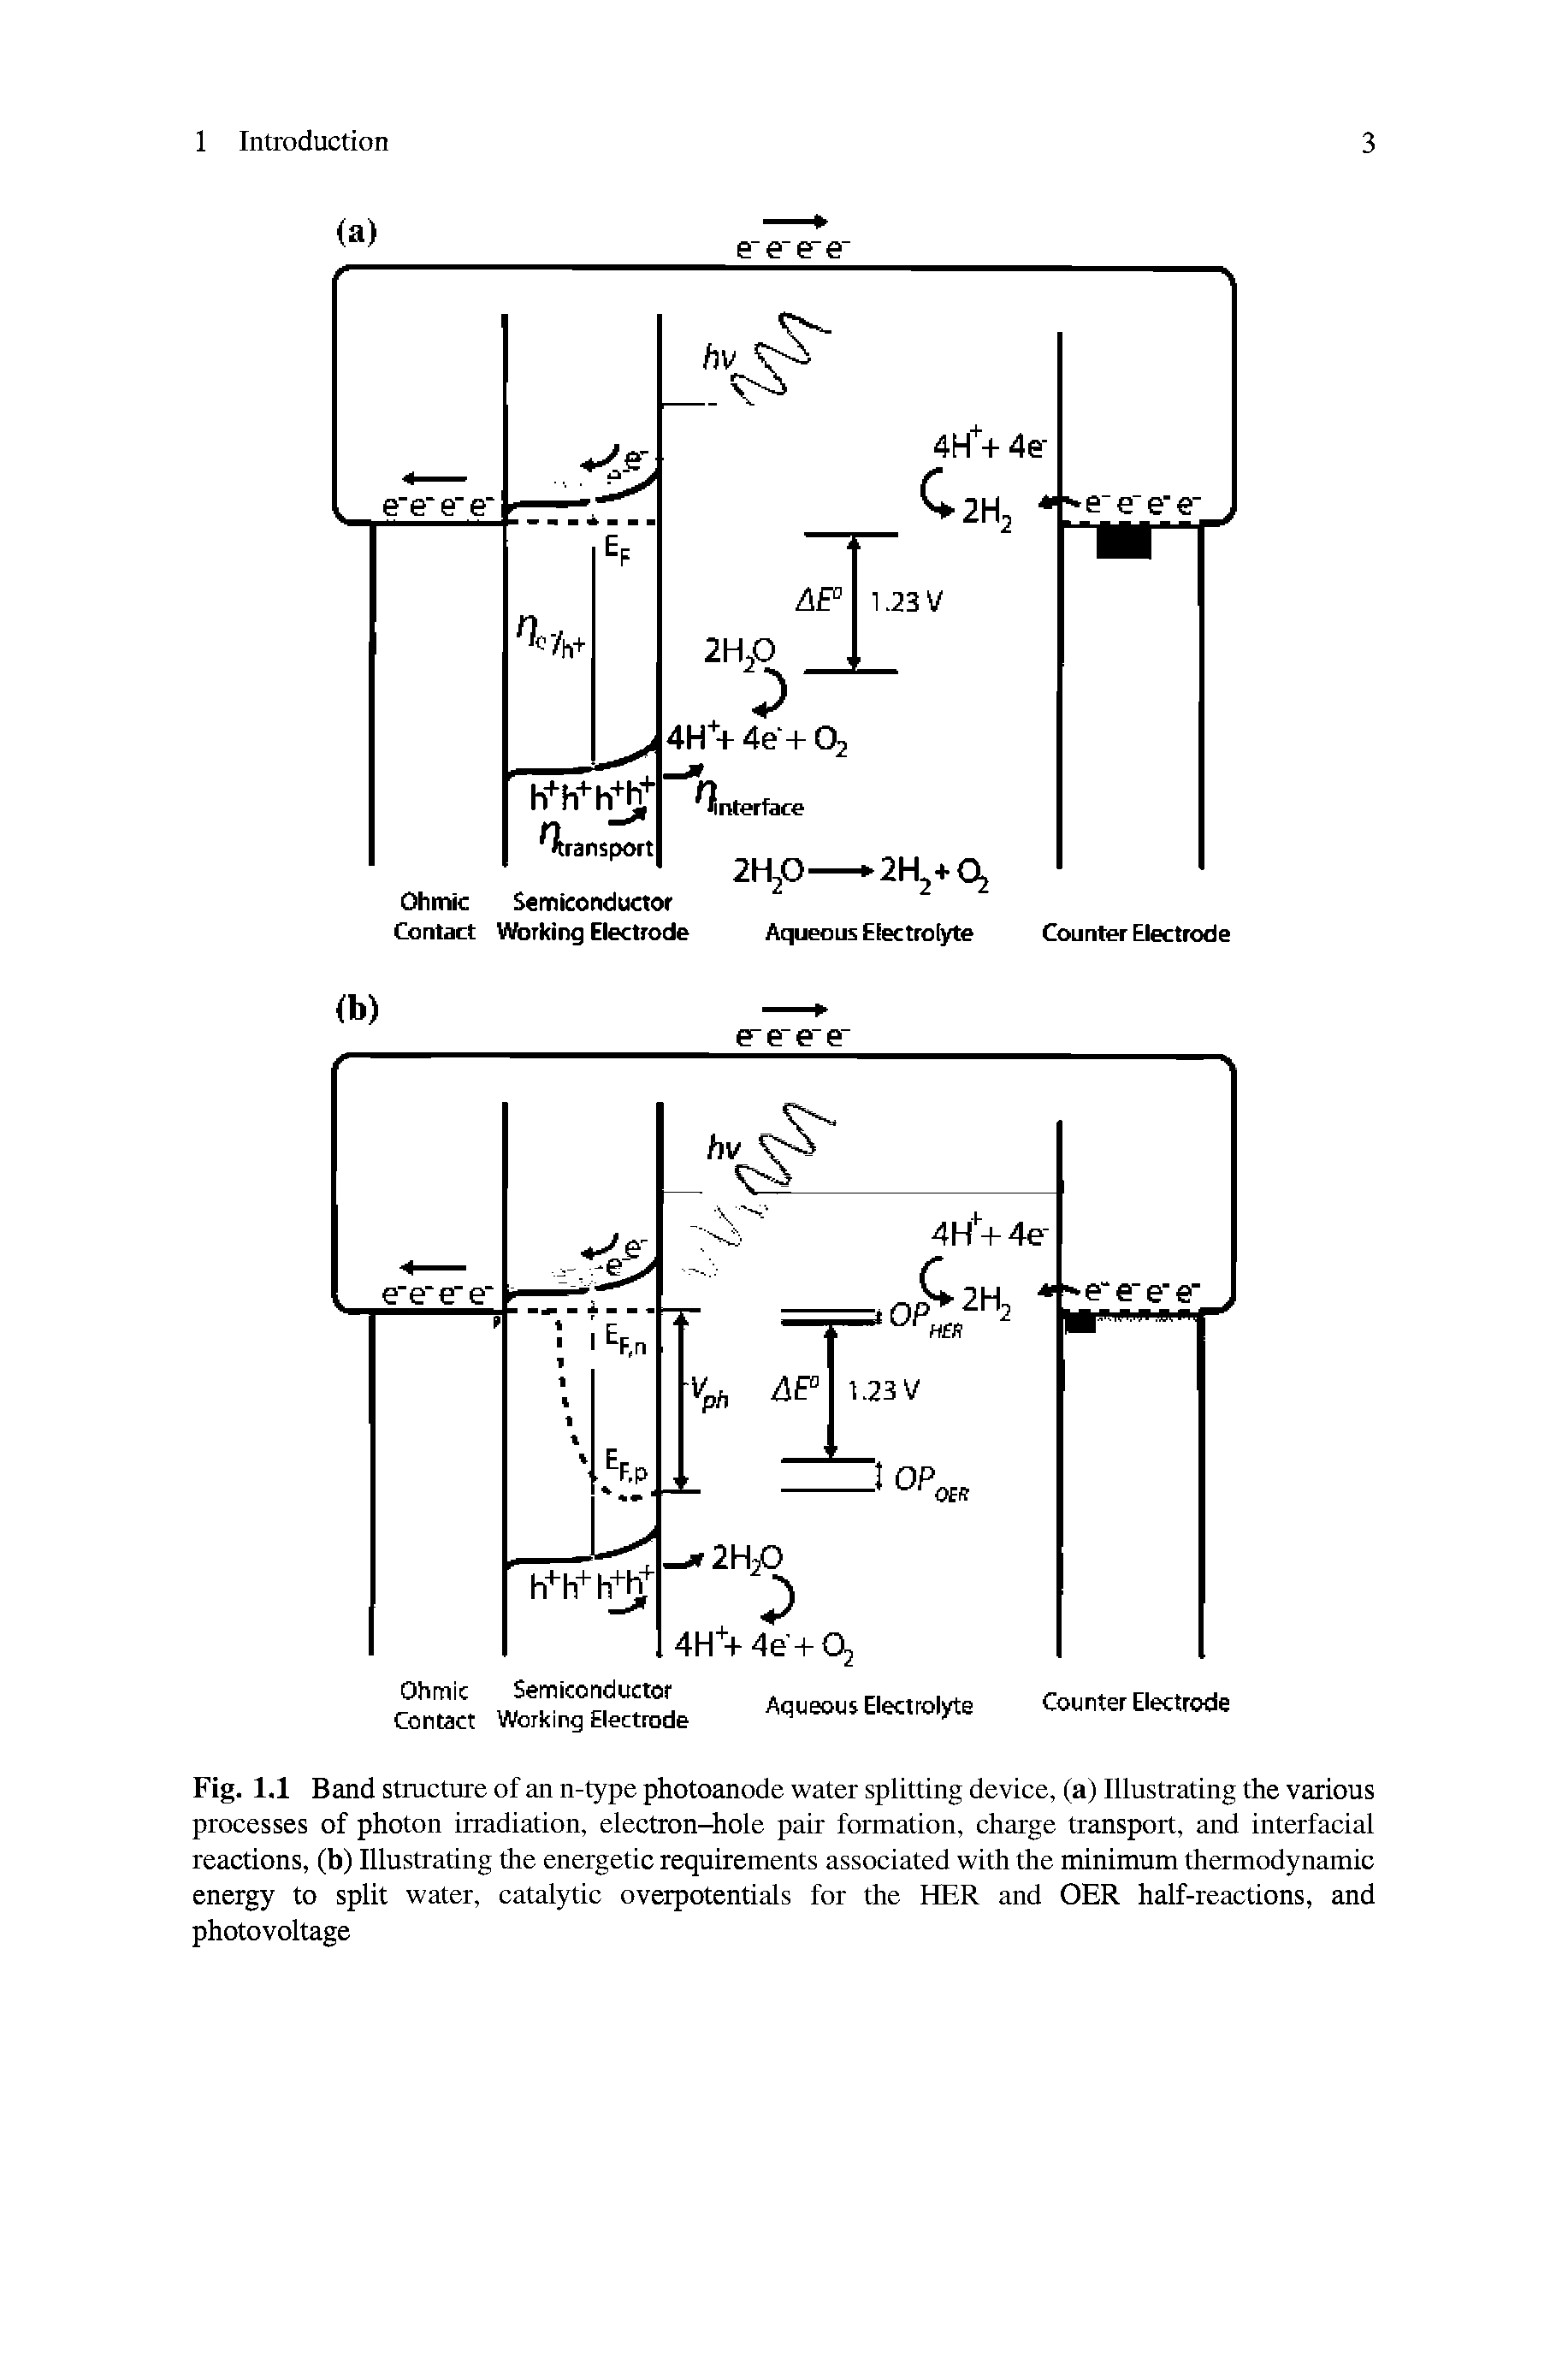 Fig. 1.1 Band structure of an n-type photoanode water splitting device, (a) Illustrating the various processes of photon irradiation, electron-hole pair formation, charge transport, and interfadal reactions, (b) Illustrating the energetic requirements associated with the minimum thermodynamic energy to split water, catalytic overpotentials for the HER and OER half-reactions, and photovoltage...